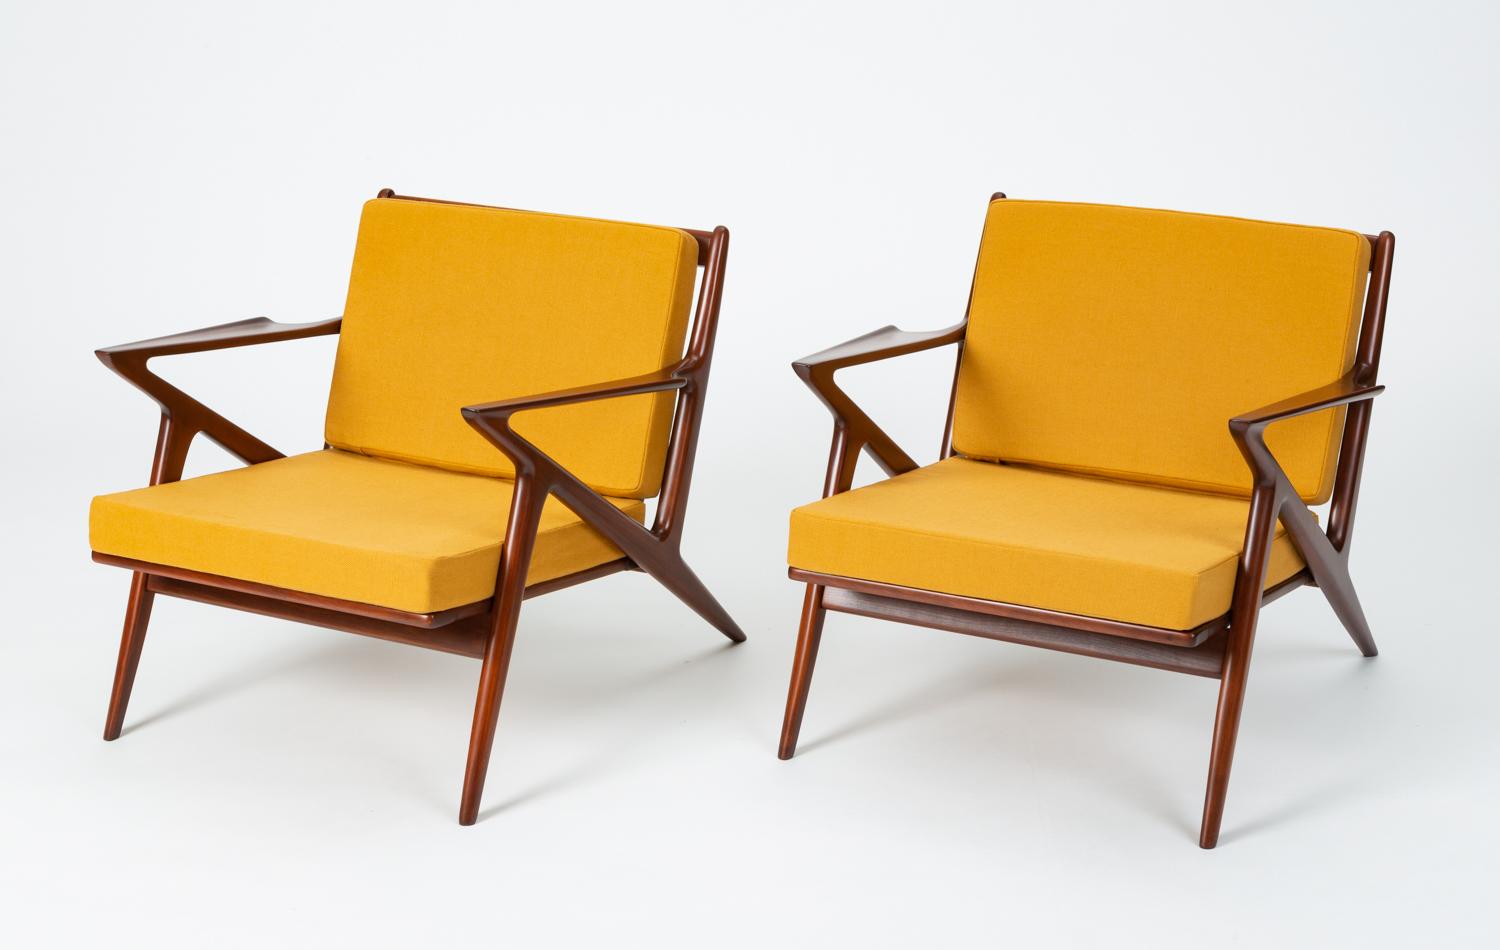 A pair of Danish modern classics from Poul Jensen and Selig. An enduringly popular design, the Z chair derives its name from the sharp angles and pointed armrests of the frame. This pair has been fully restored, with a refinished frame in the